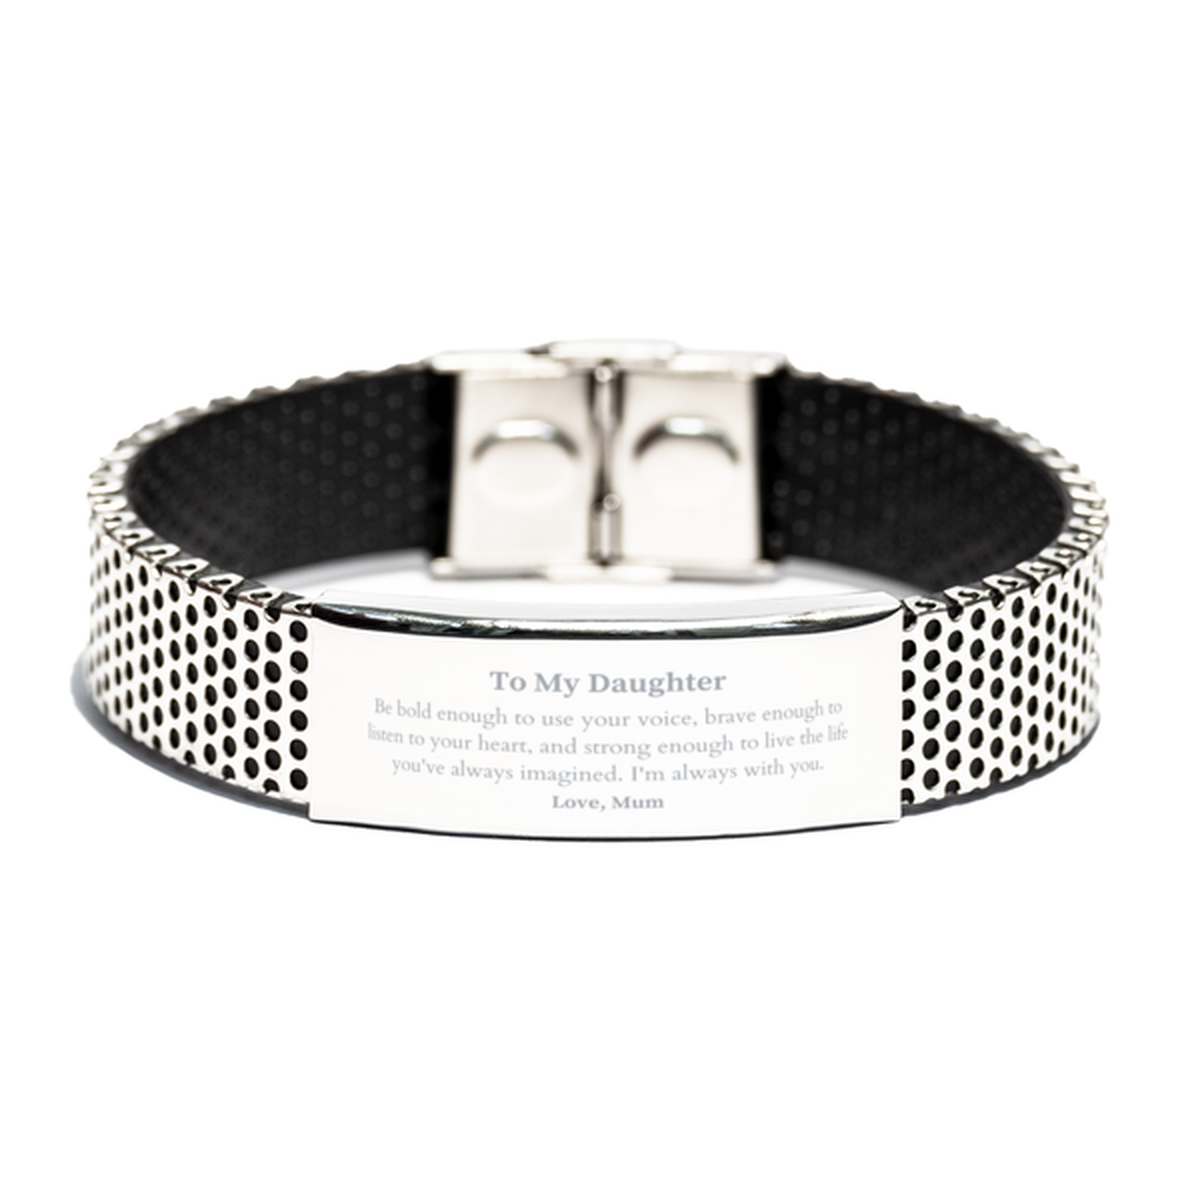 Keepsake Daughter Stainless Steel Bracelet Gift Idea Graduation Christmas Birthday Daughter from Mum, Daughter Be bold enough to use your voice, brave enough to listen to your heart. Love, Mum